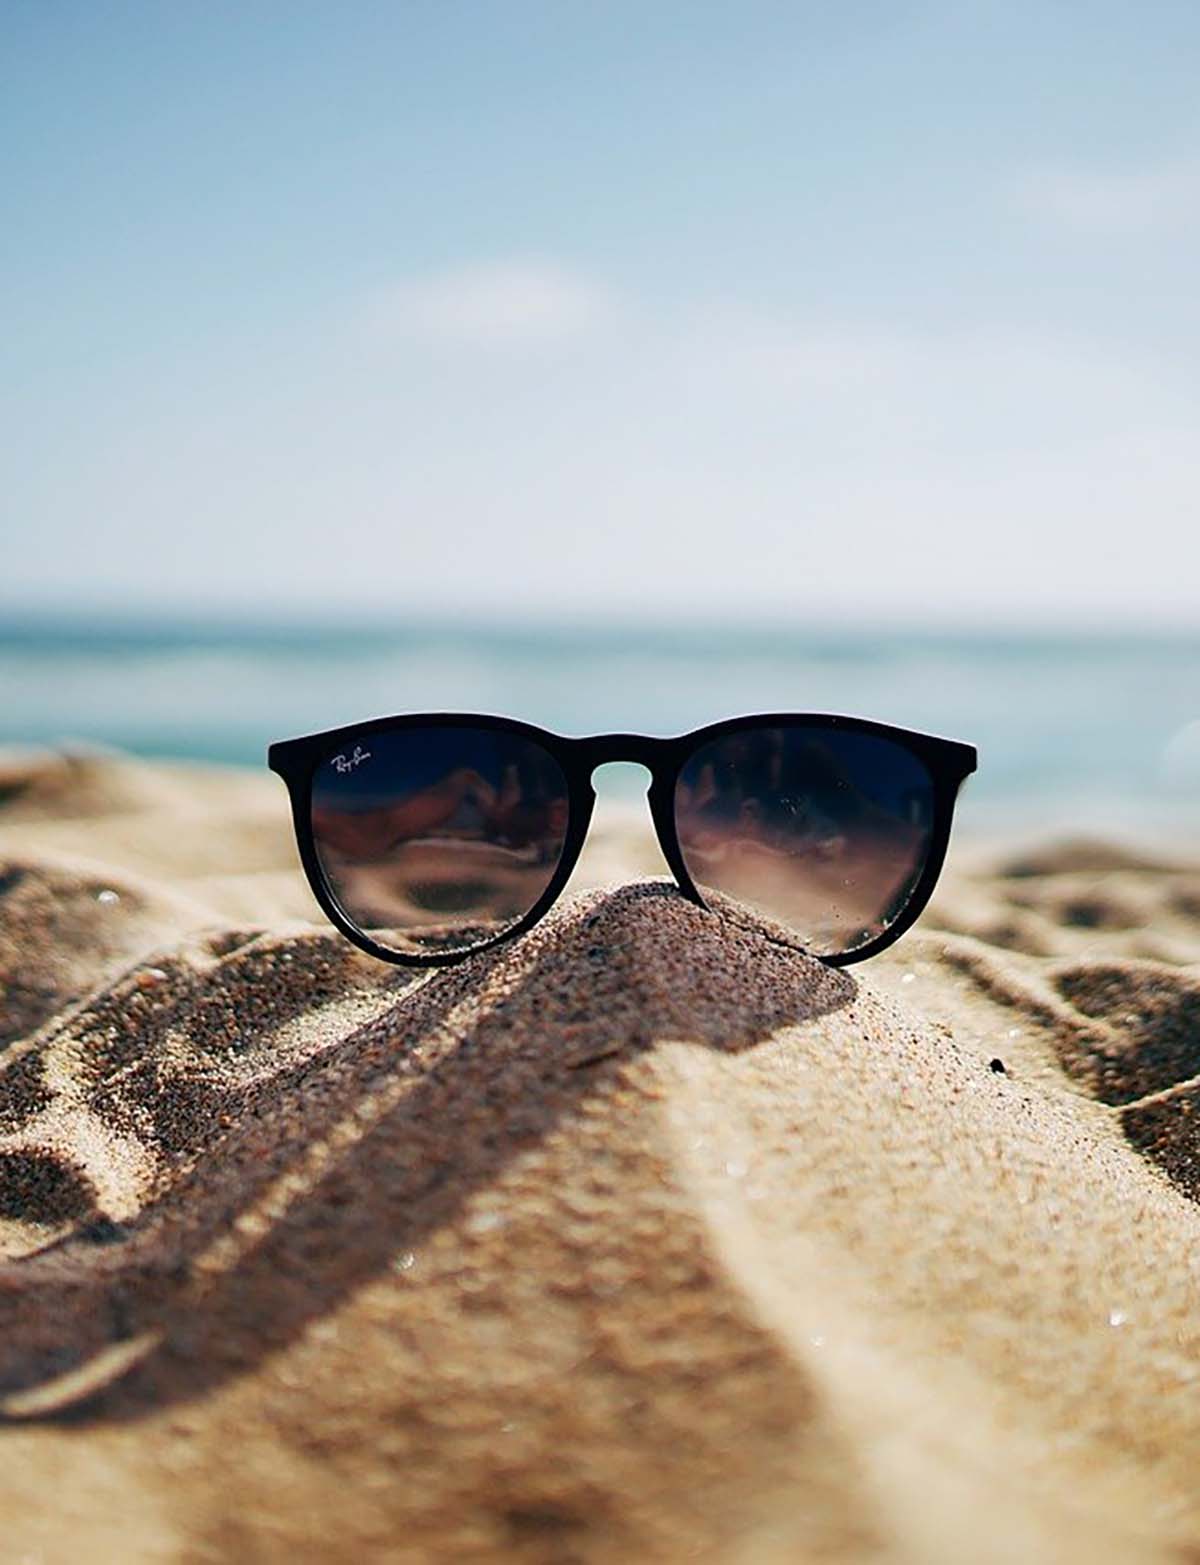 How to choose the best pair of sunglasses for travel